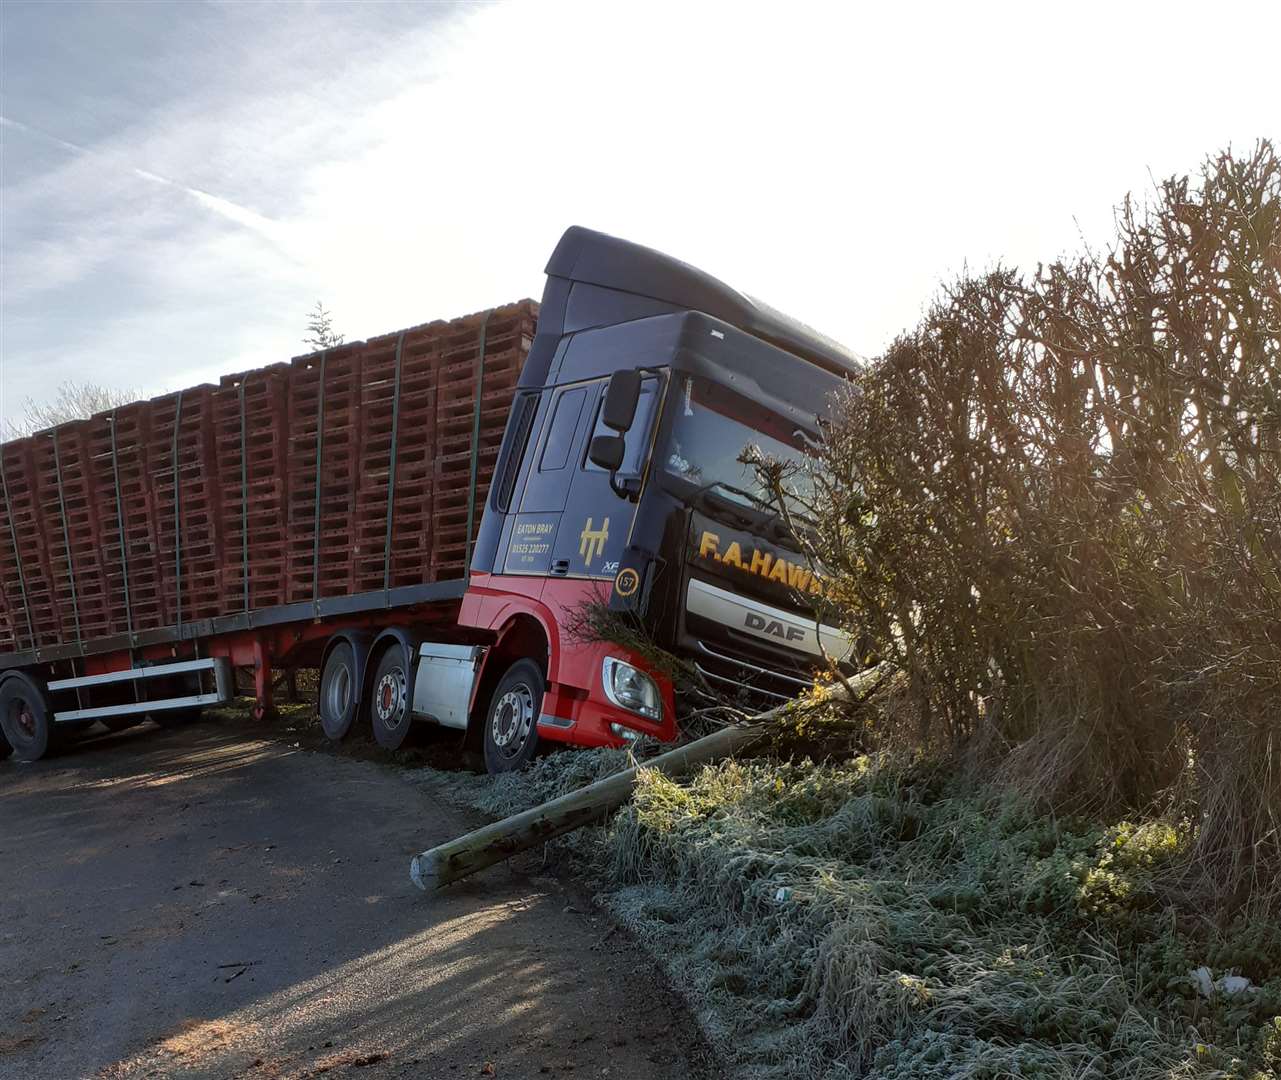 The lorry crashed in Redwall Lane, Linton